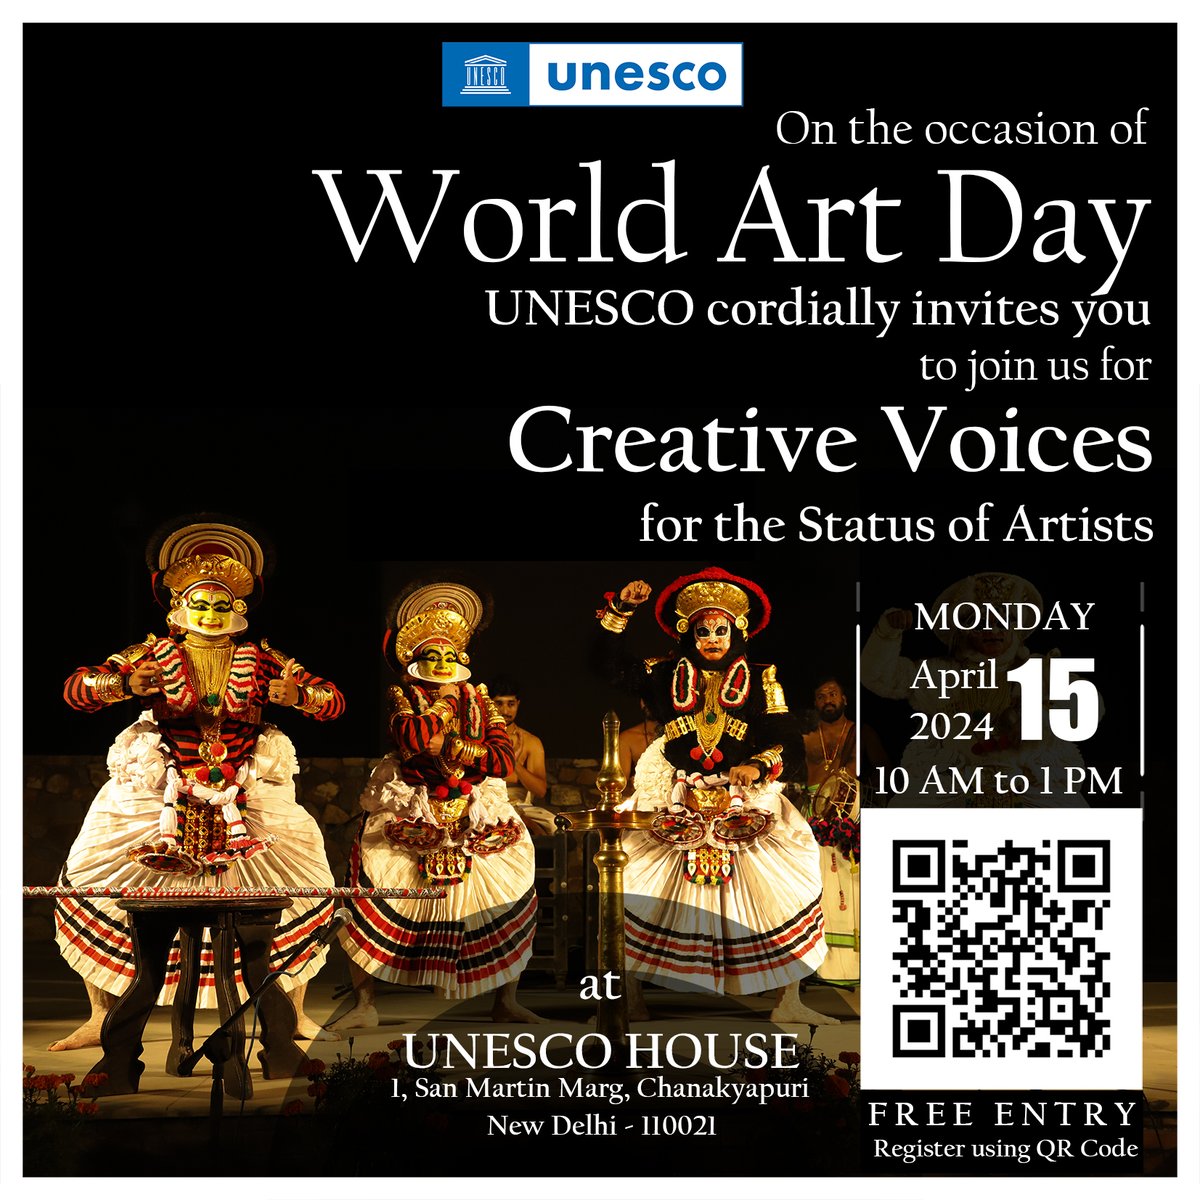 Join us on #WorldArtDay as we dive into crucial discussions on artists' status & the performing arts in India. 📅 April 15 🕙 10 AM - 1 PM 📍 UNESCO House, New Delhi Don't miss out on insightful panels with prominent artists & cultural organizations. forms.gle/TeUQ4psX56c5ck…